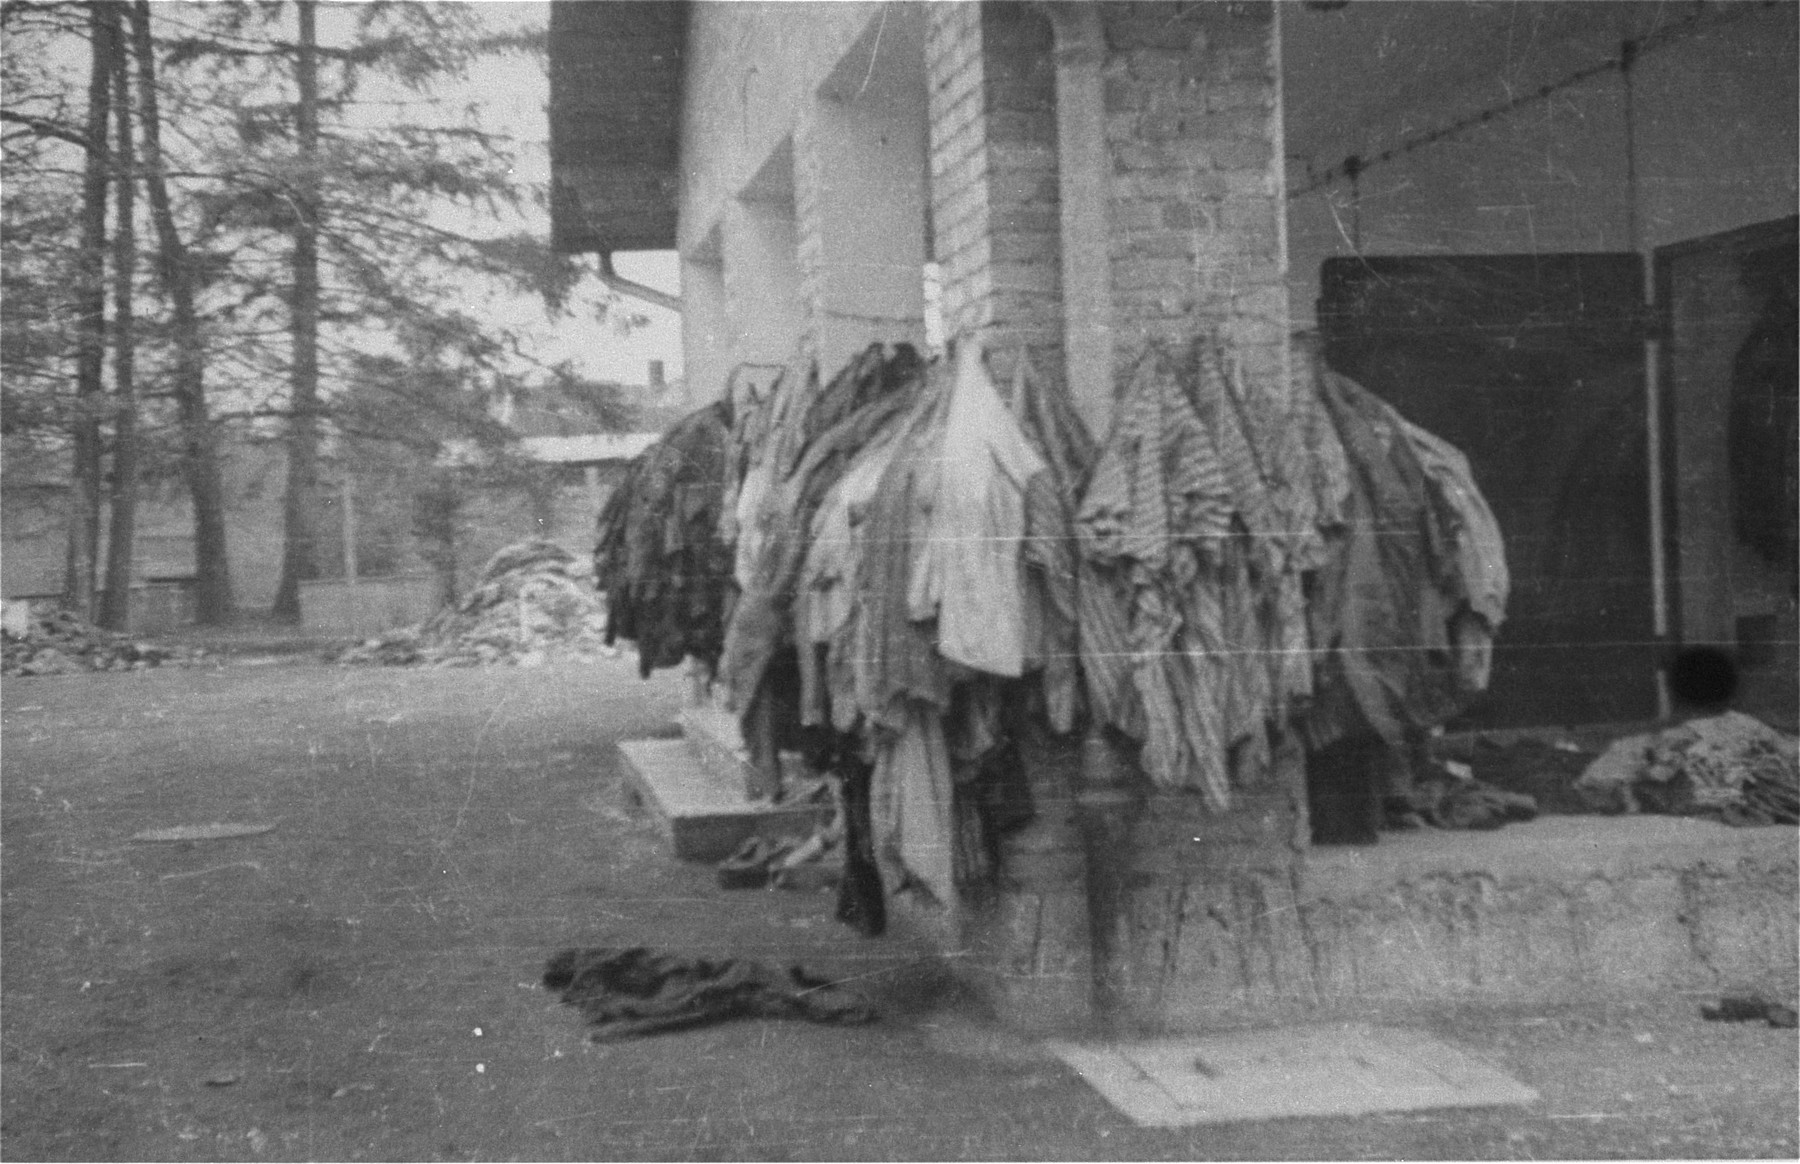 Prisoners' uniforms hung up outside a camp building.